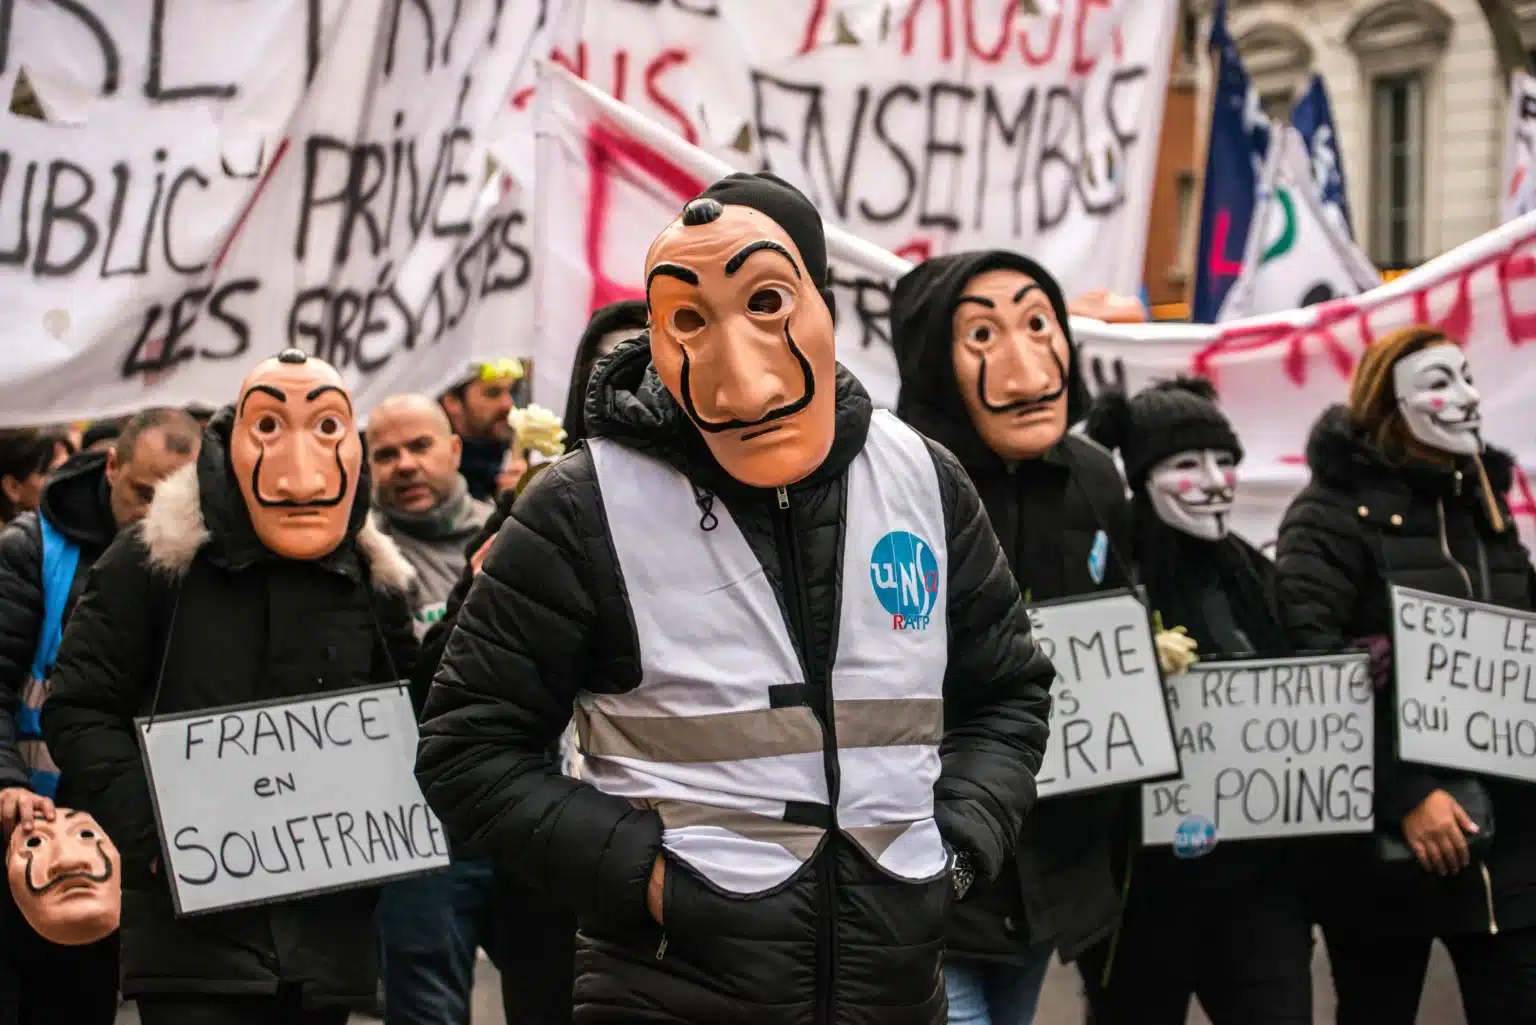 Pension protest in France